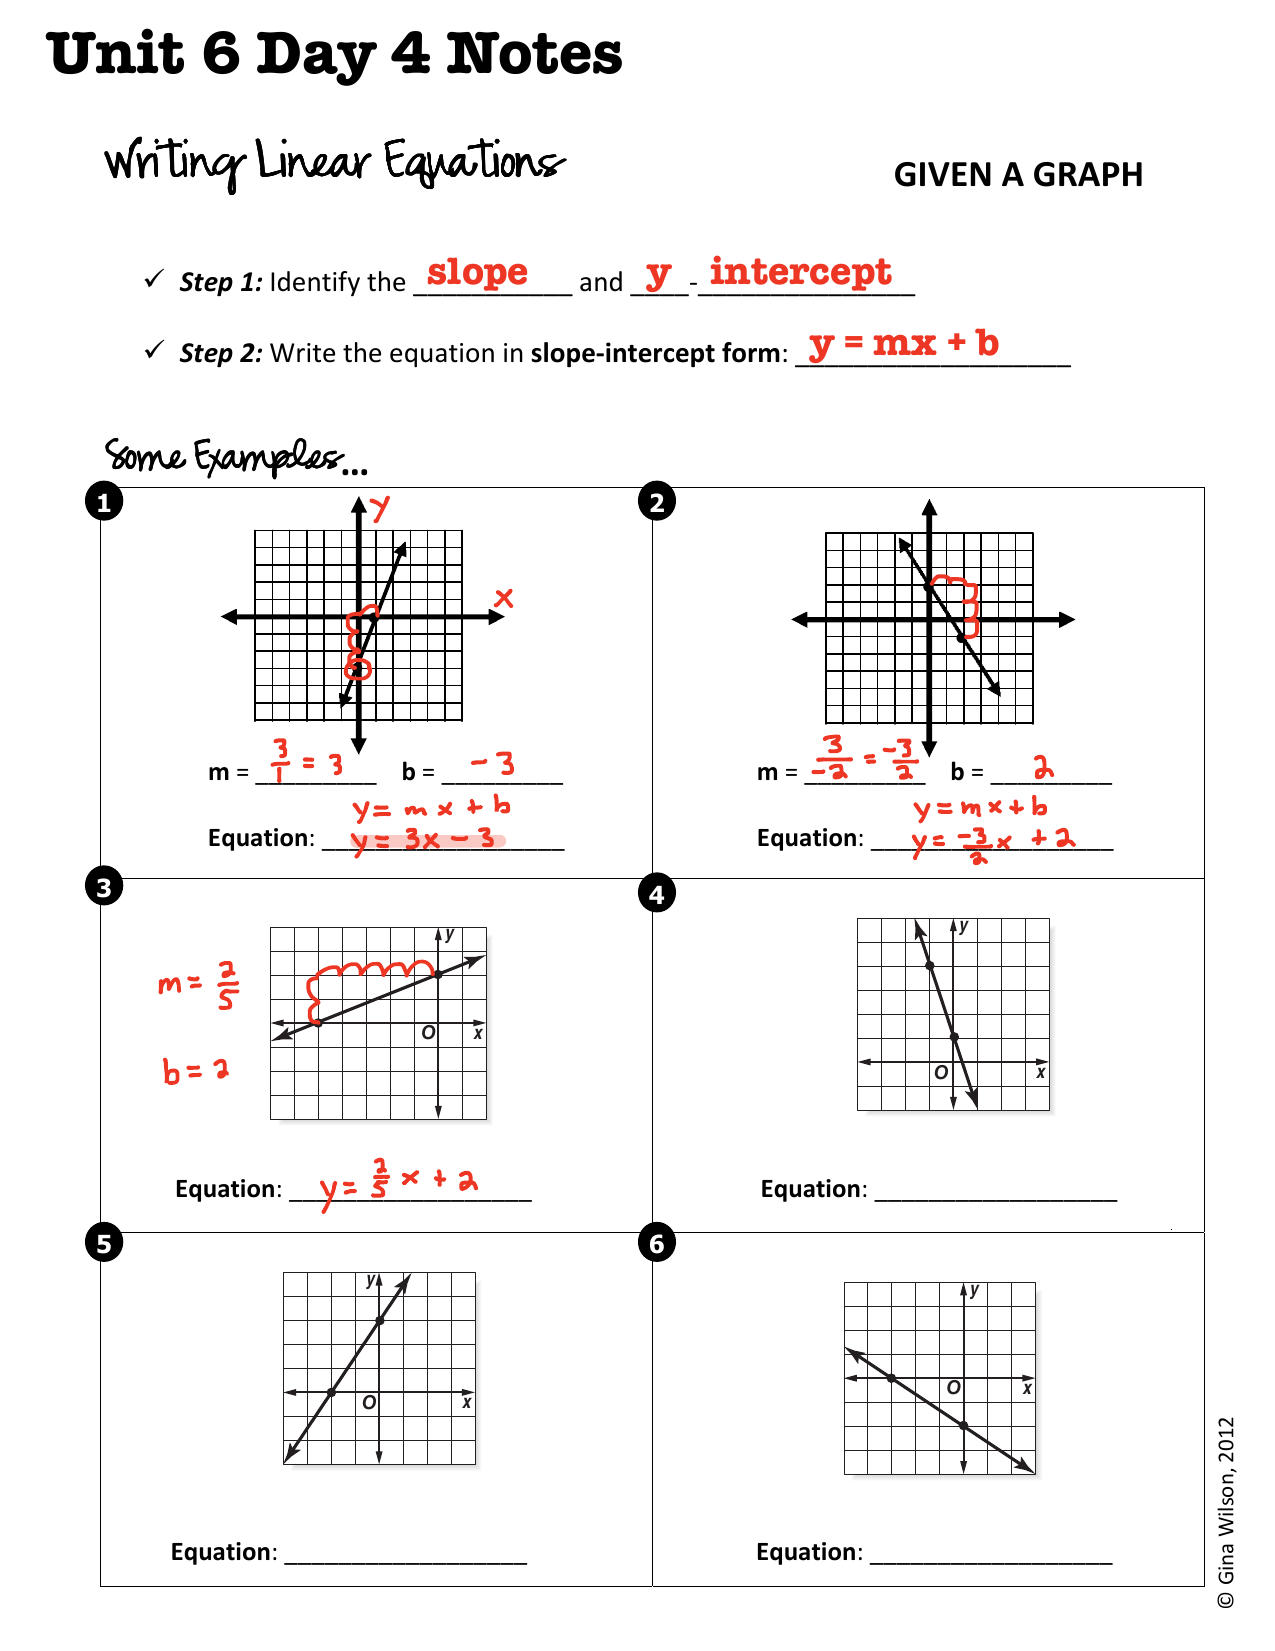 Writing Linear Equations Regarding Writing Linear Equations Worksheet Answers